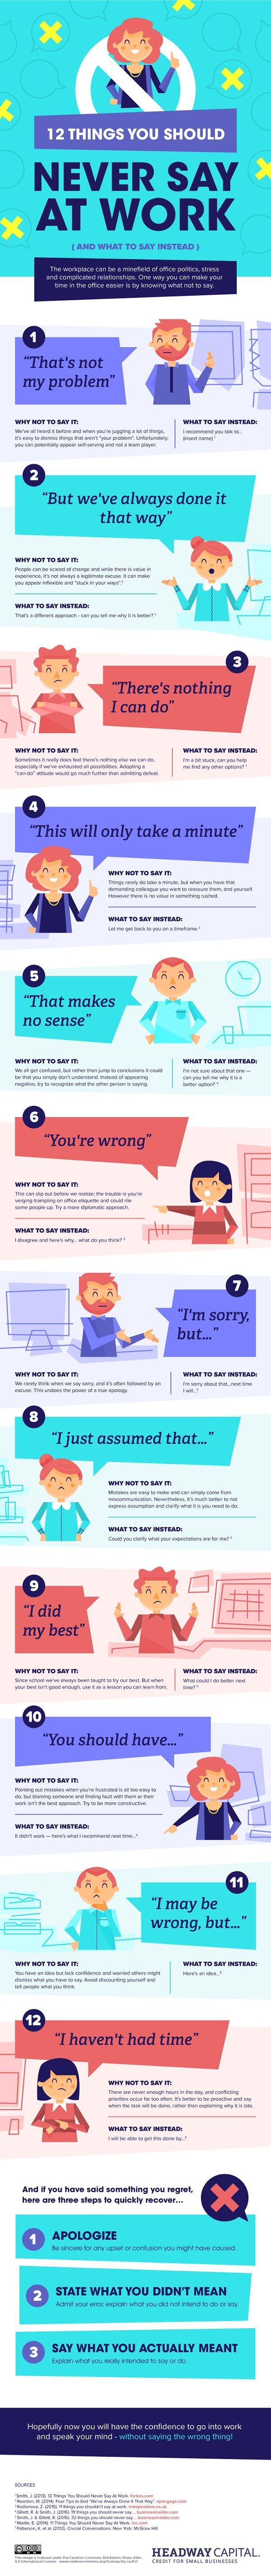 Infographic: 12 Things You Should Never Say At Work (And What To Say Instead)